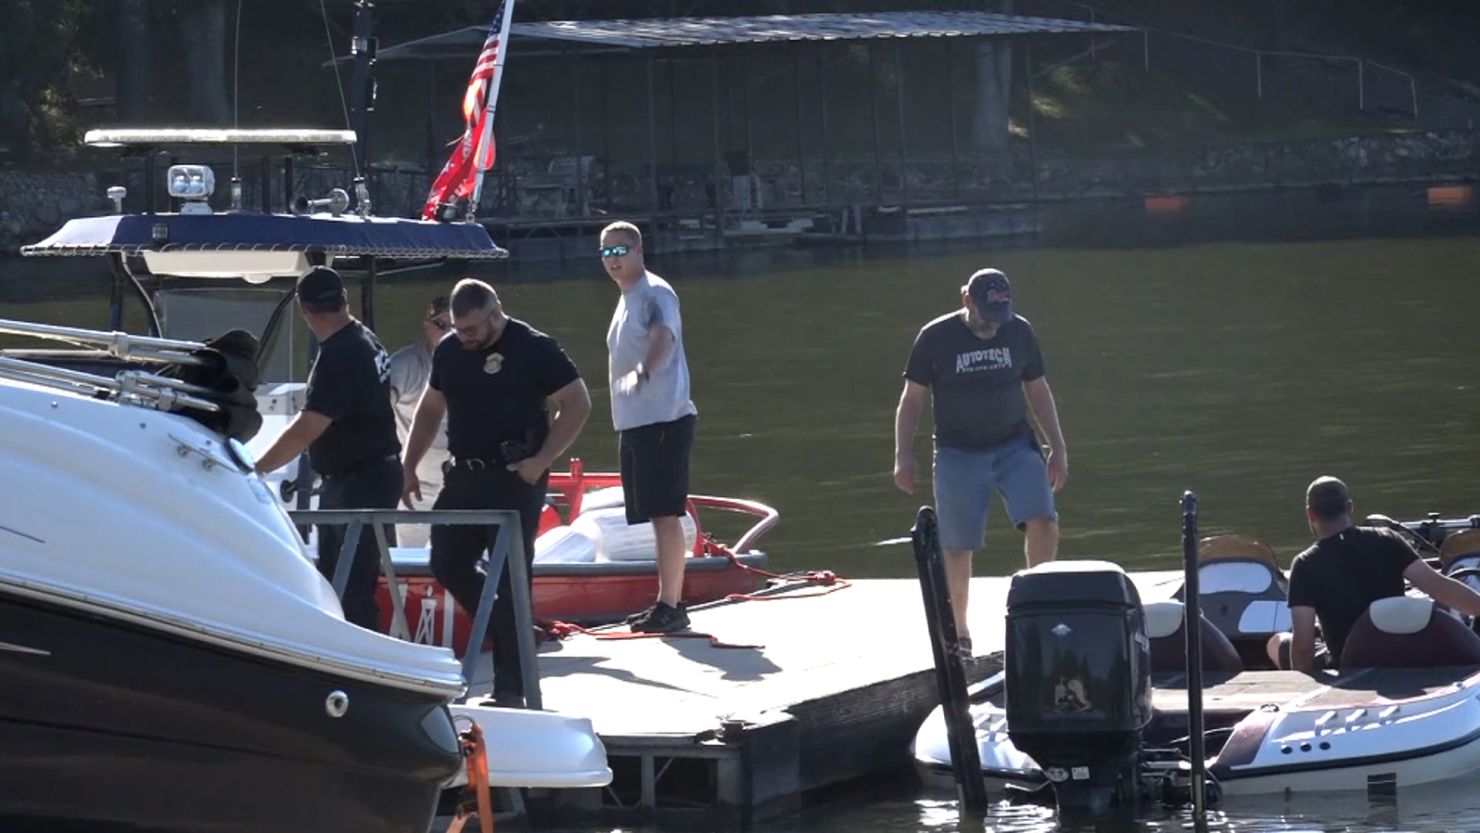 Investigators responded to a boat explosion on the Lake of the Ozarks.